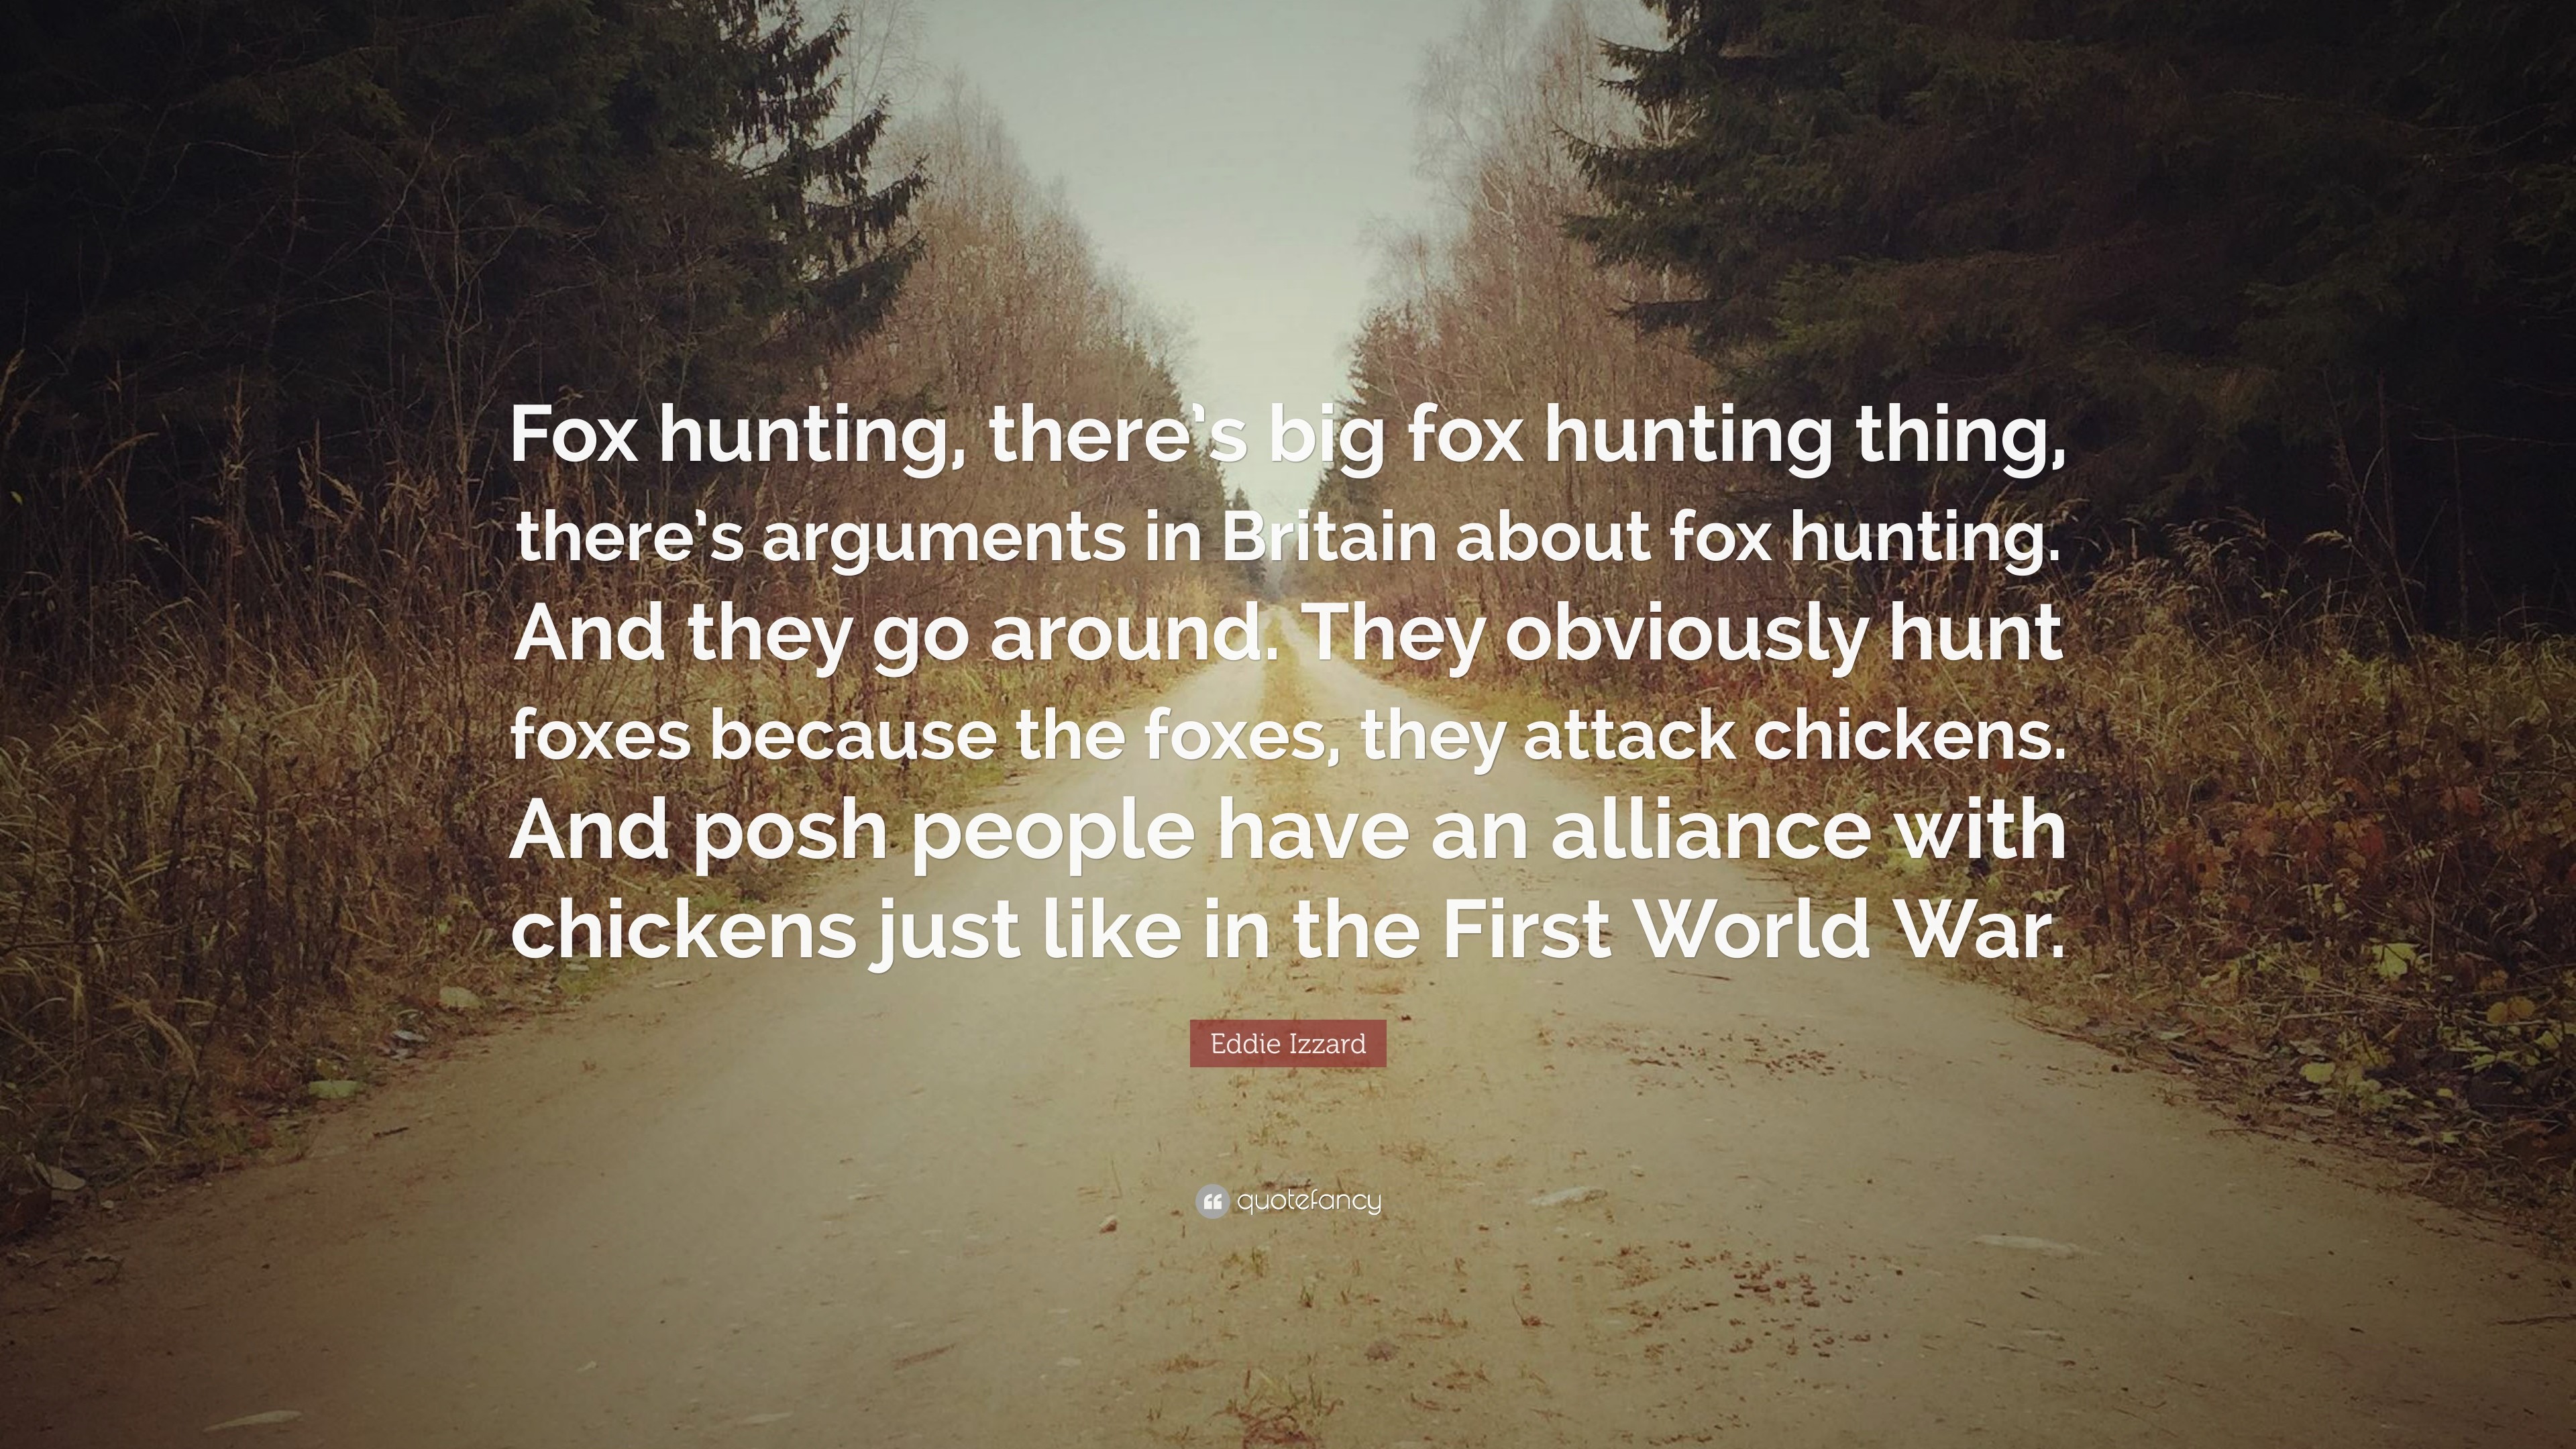 3840x2160 Eddie Izzard Quote: “Fox hunting, there's big fox hunting thing, there's  arguments